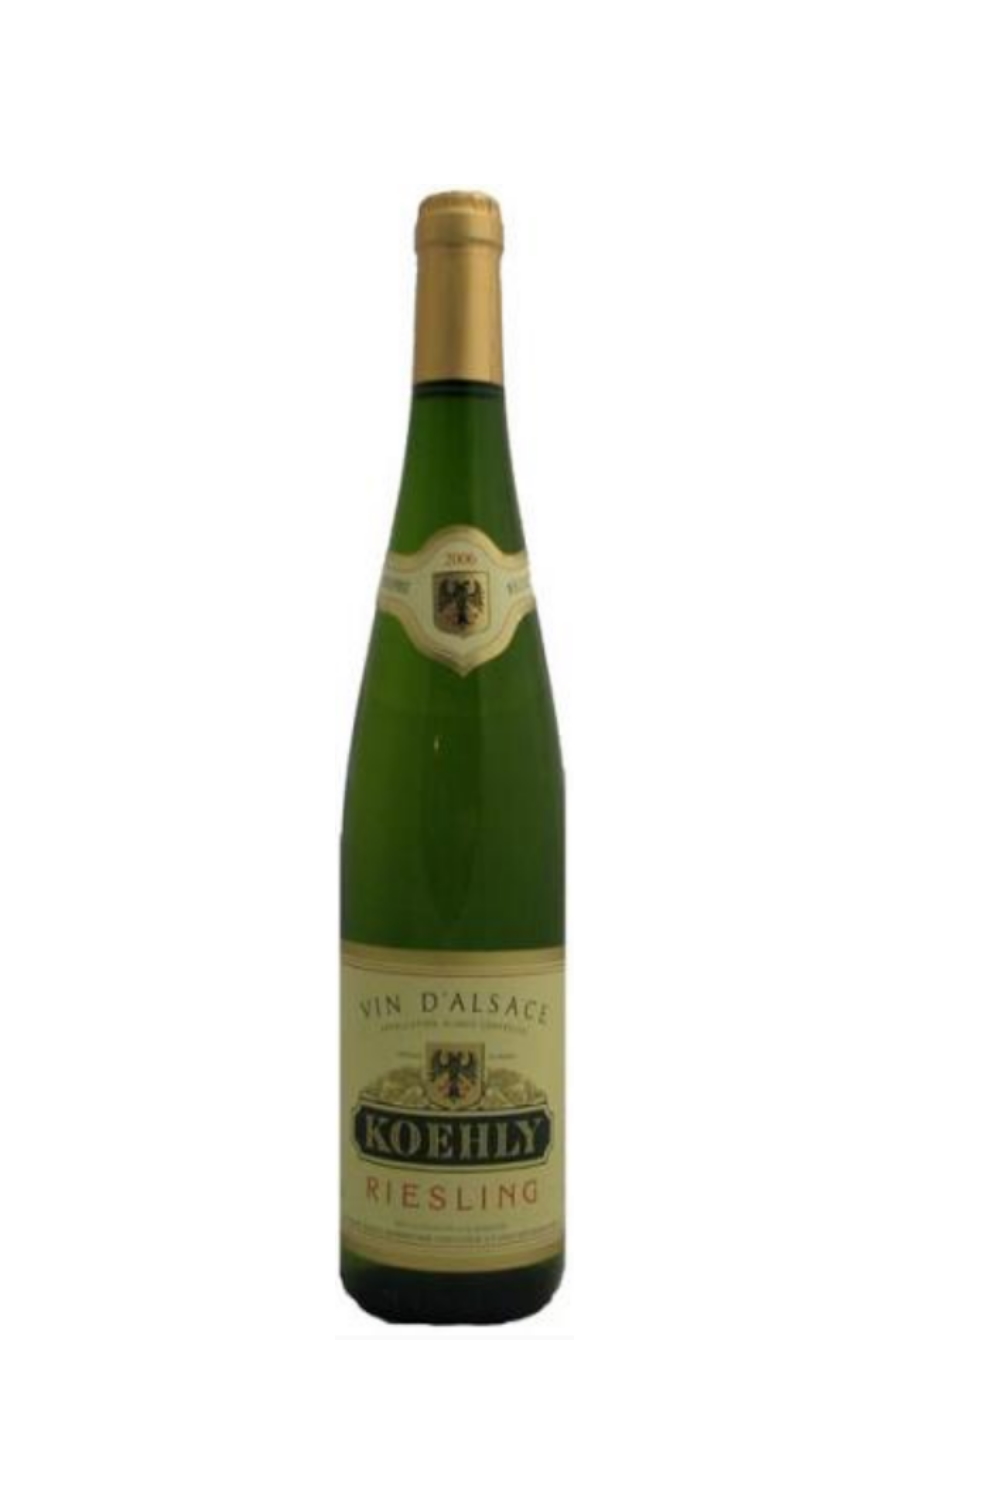 Riesling Tradition 2016   VIN  D'ALSACE KOEHLY   Lalsace- en-Bouteille   KINTZHEIM